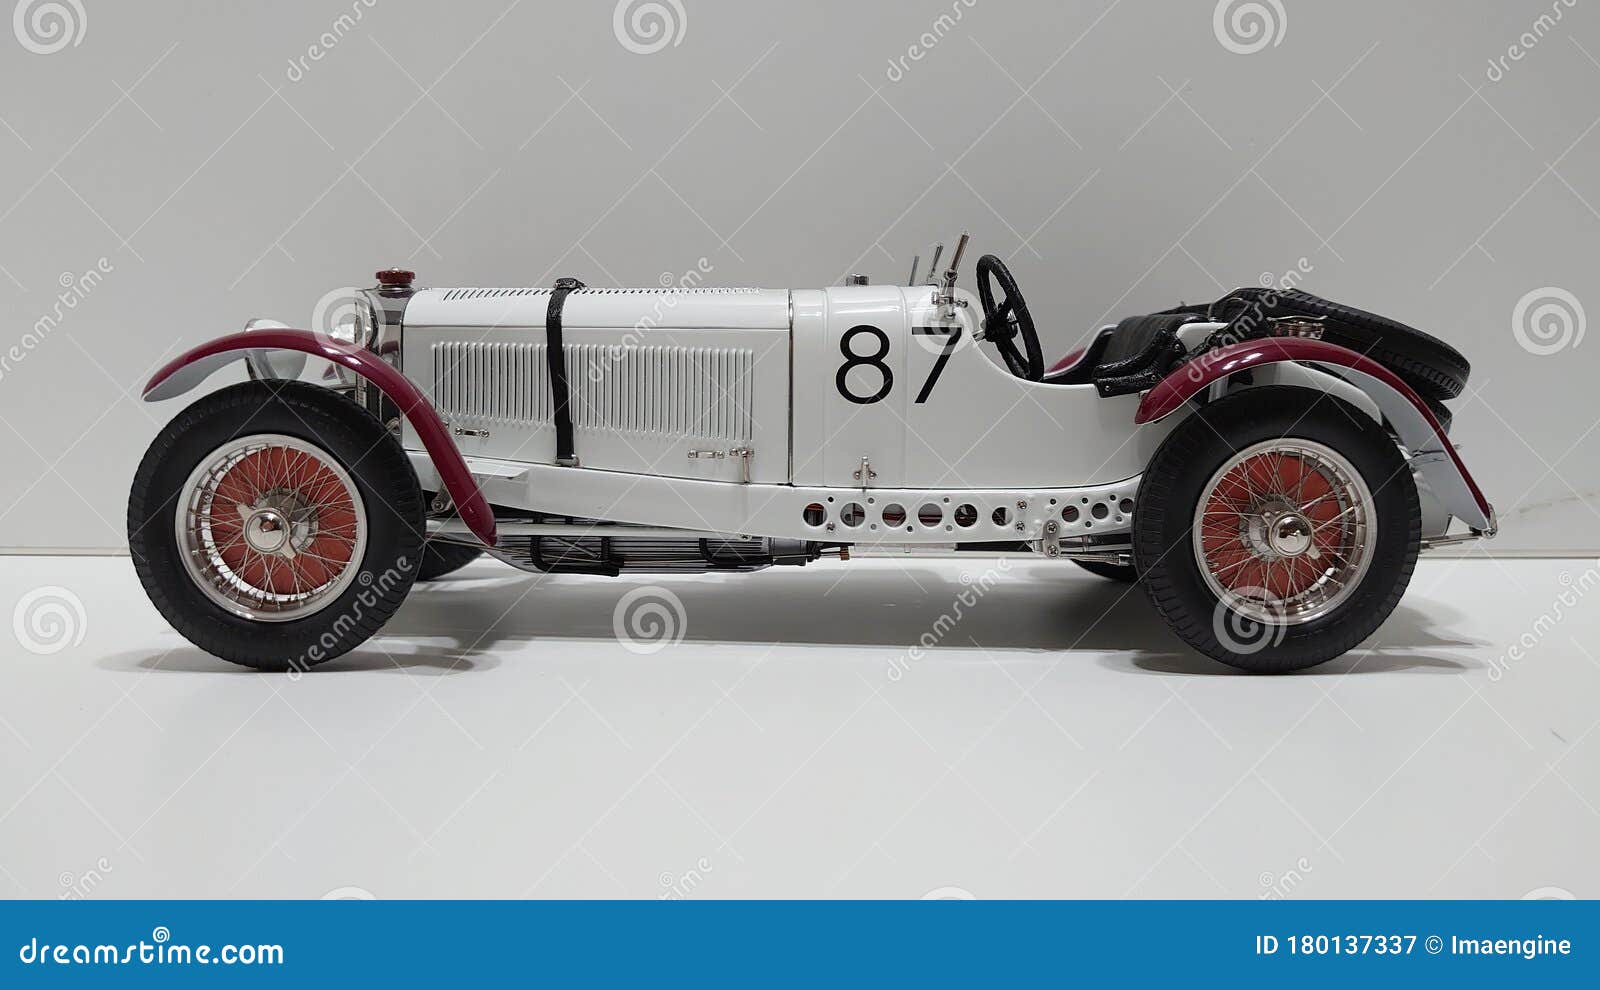 Cmc 1/18 Scale Model Car - Mercedes Benz SSKL Mille Miglia  X22;white  Elephant X22; Legendary Racing Vehicle Editorial Photography - Image of  bumper, vehicle: 180137337